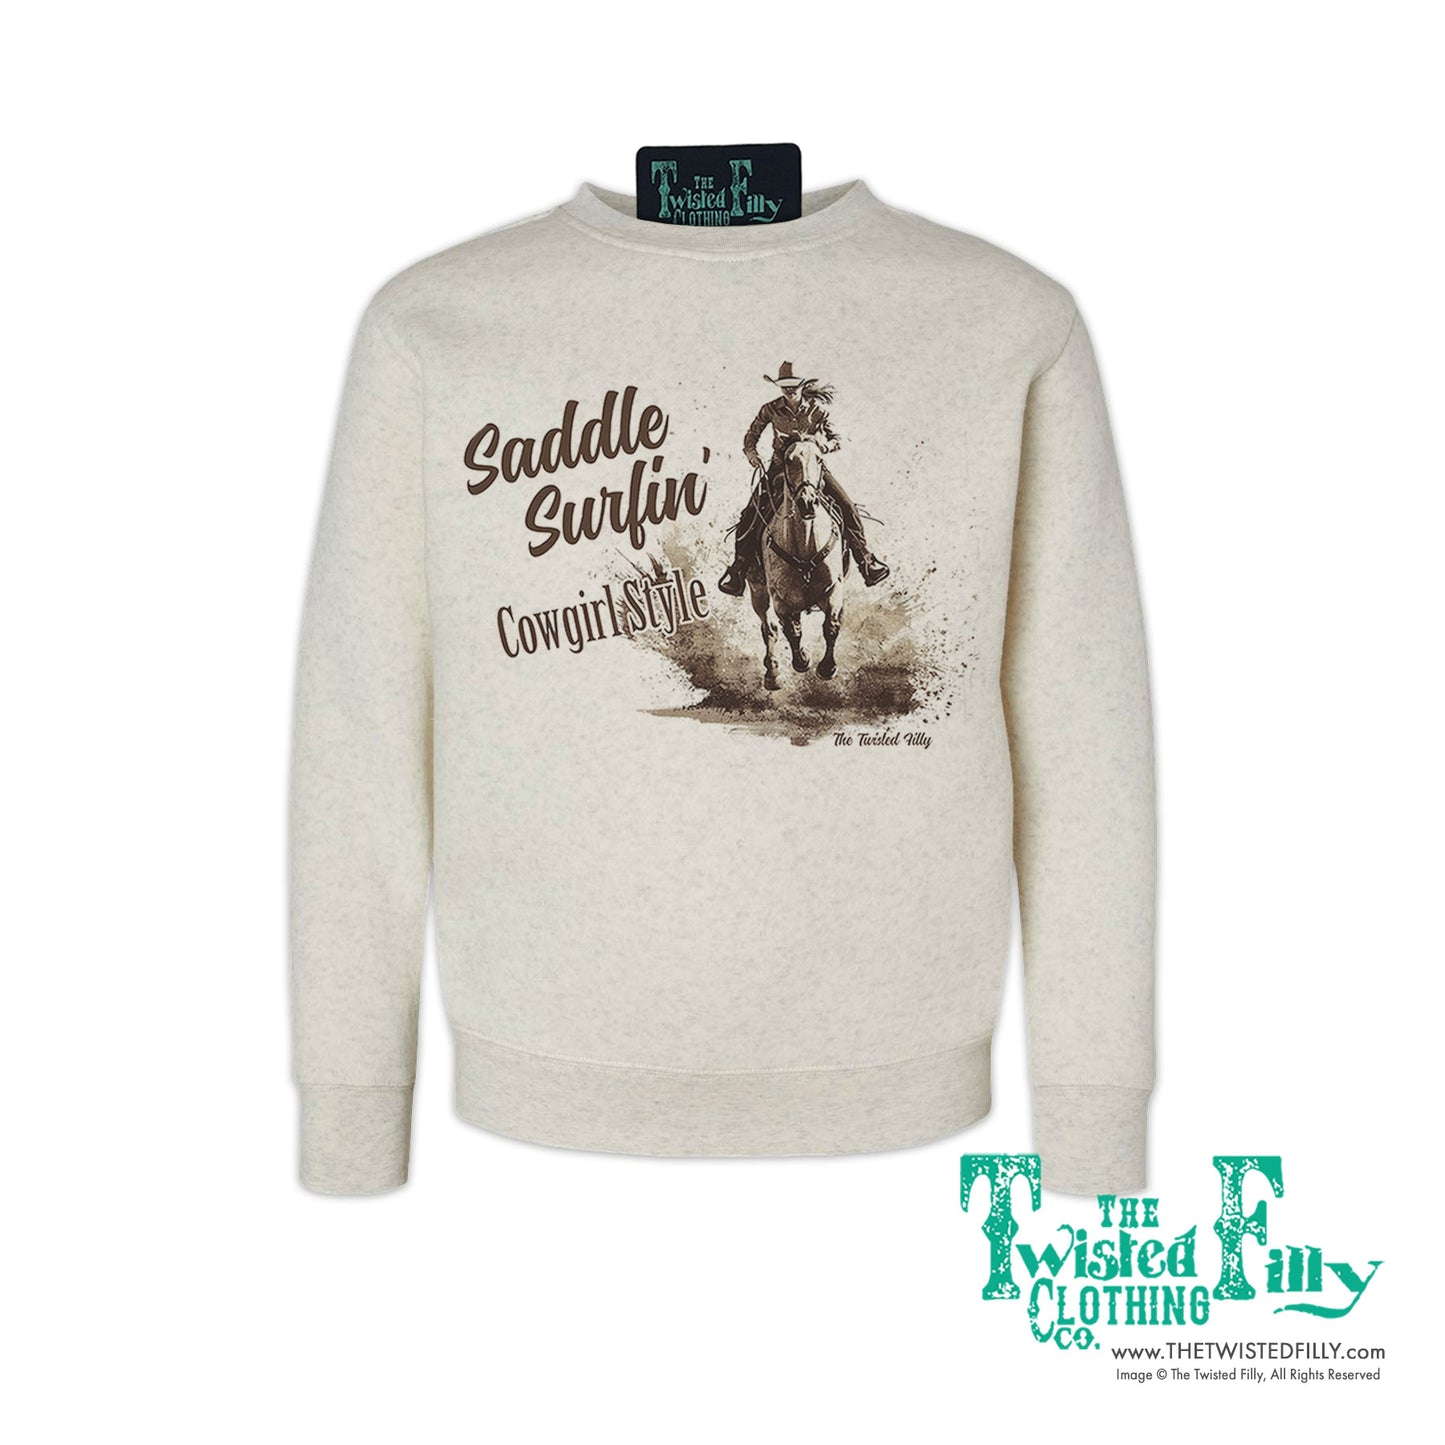 Saddle Surfin' Cowgirl Style - Youth Girls Sweatshirt - Assorted Colors